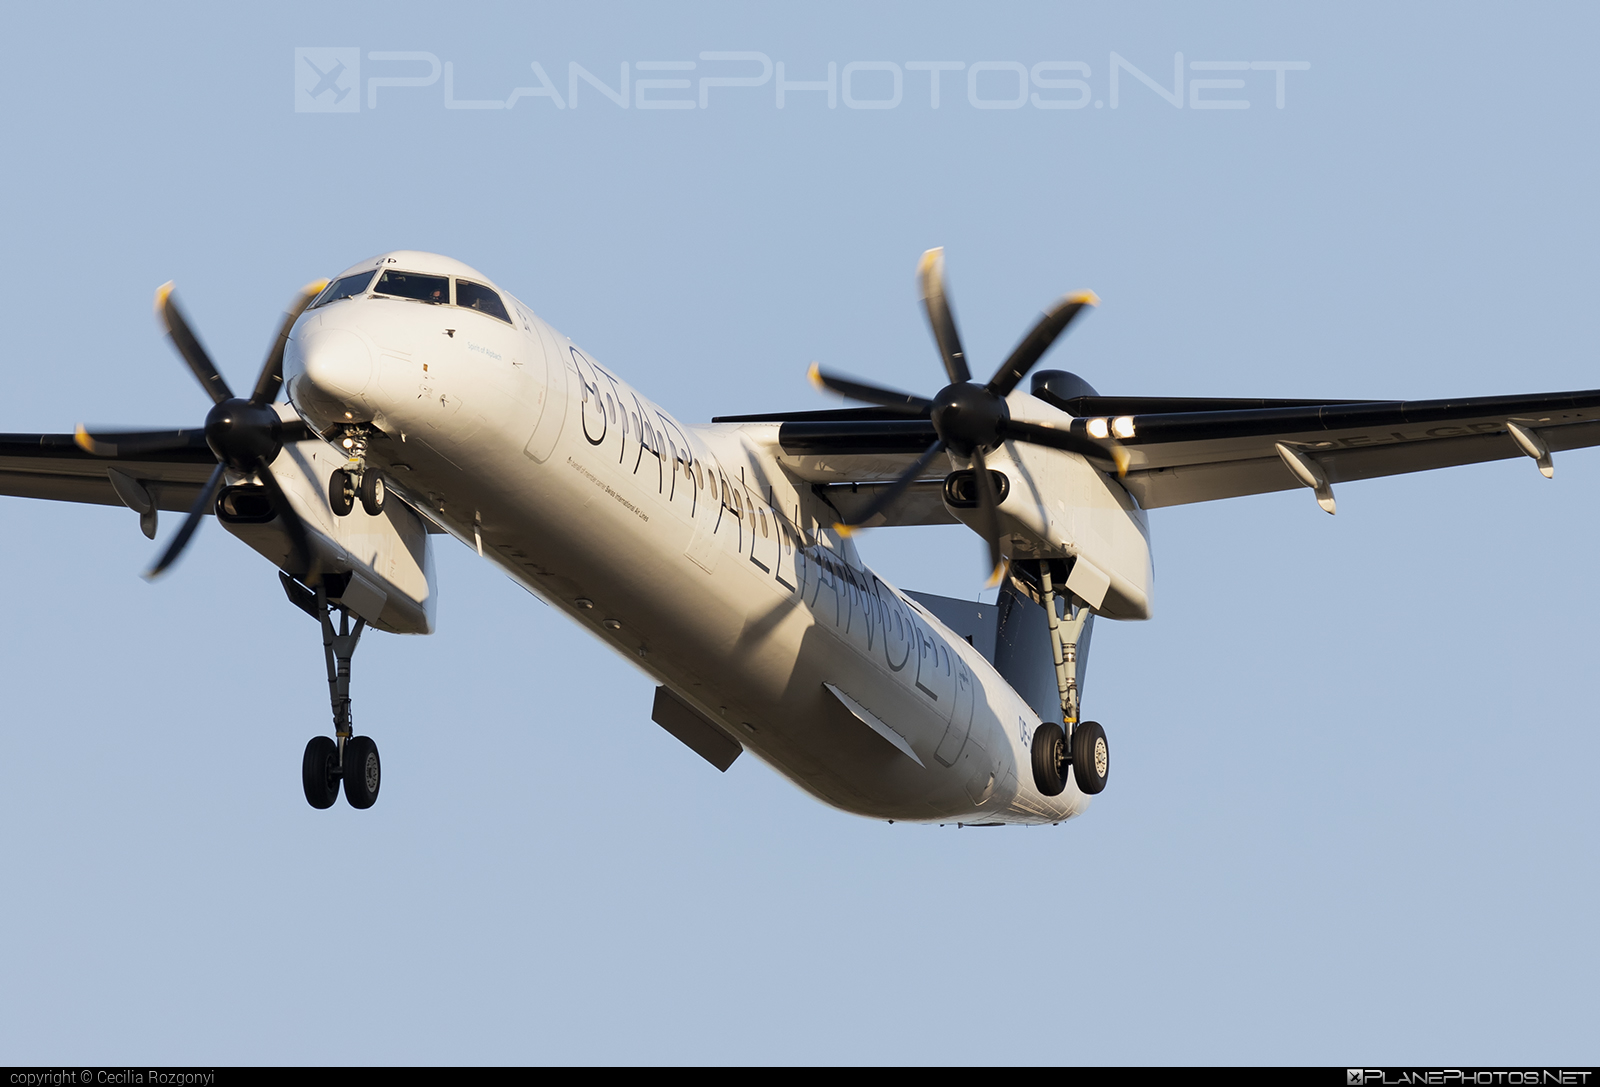 Bombardier DHC-8-Q402 Dash 8 - OE-LGP operated by Austrian Airlines #austrian #austrianAirlines #bombardier #dash8 #dhc8 #dhc8q402 #staralliance